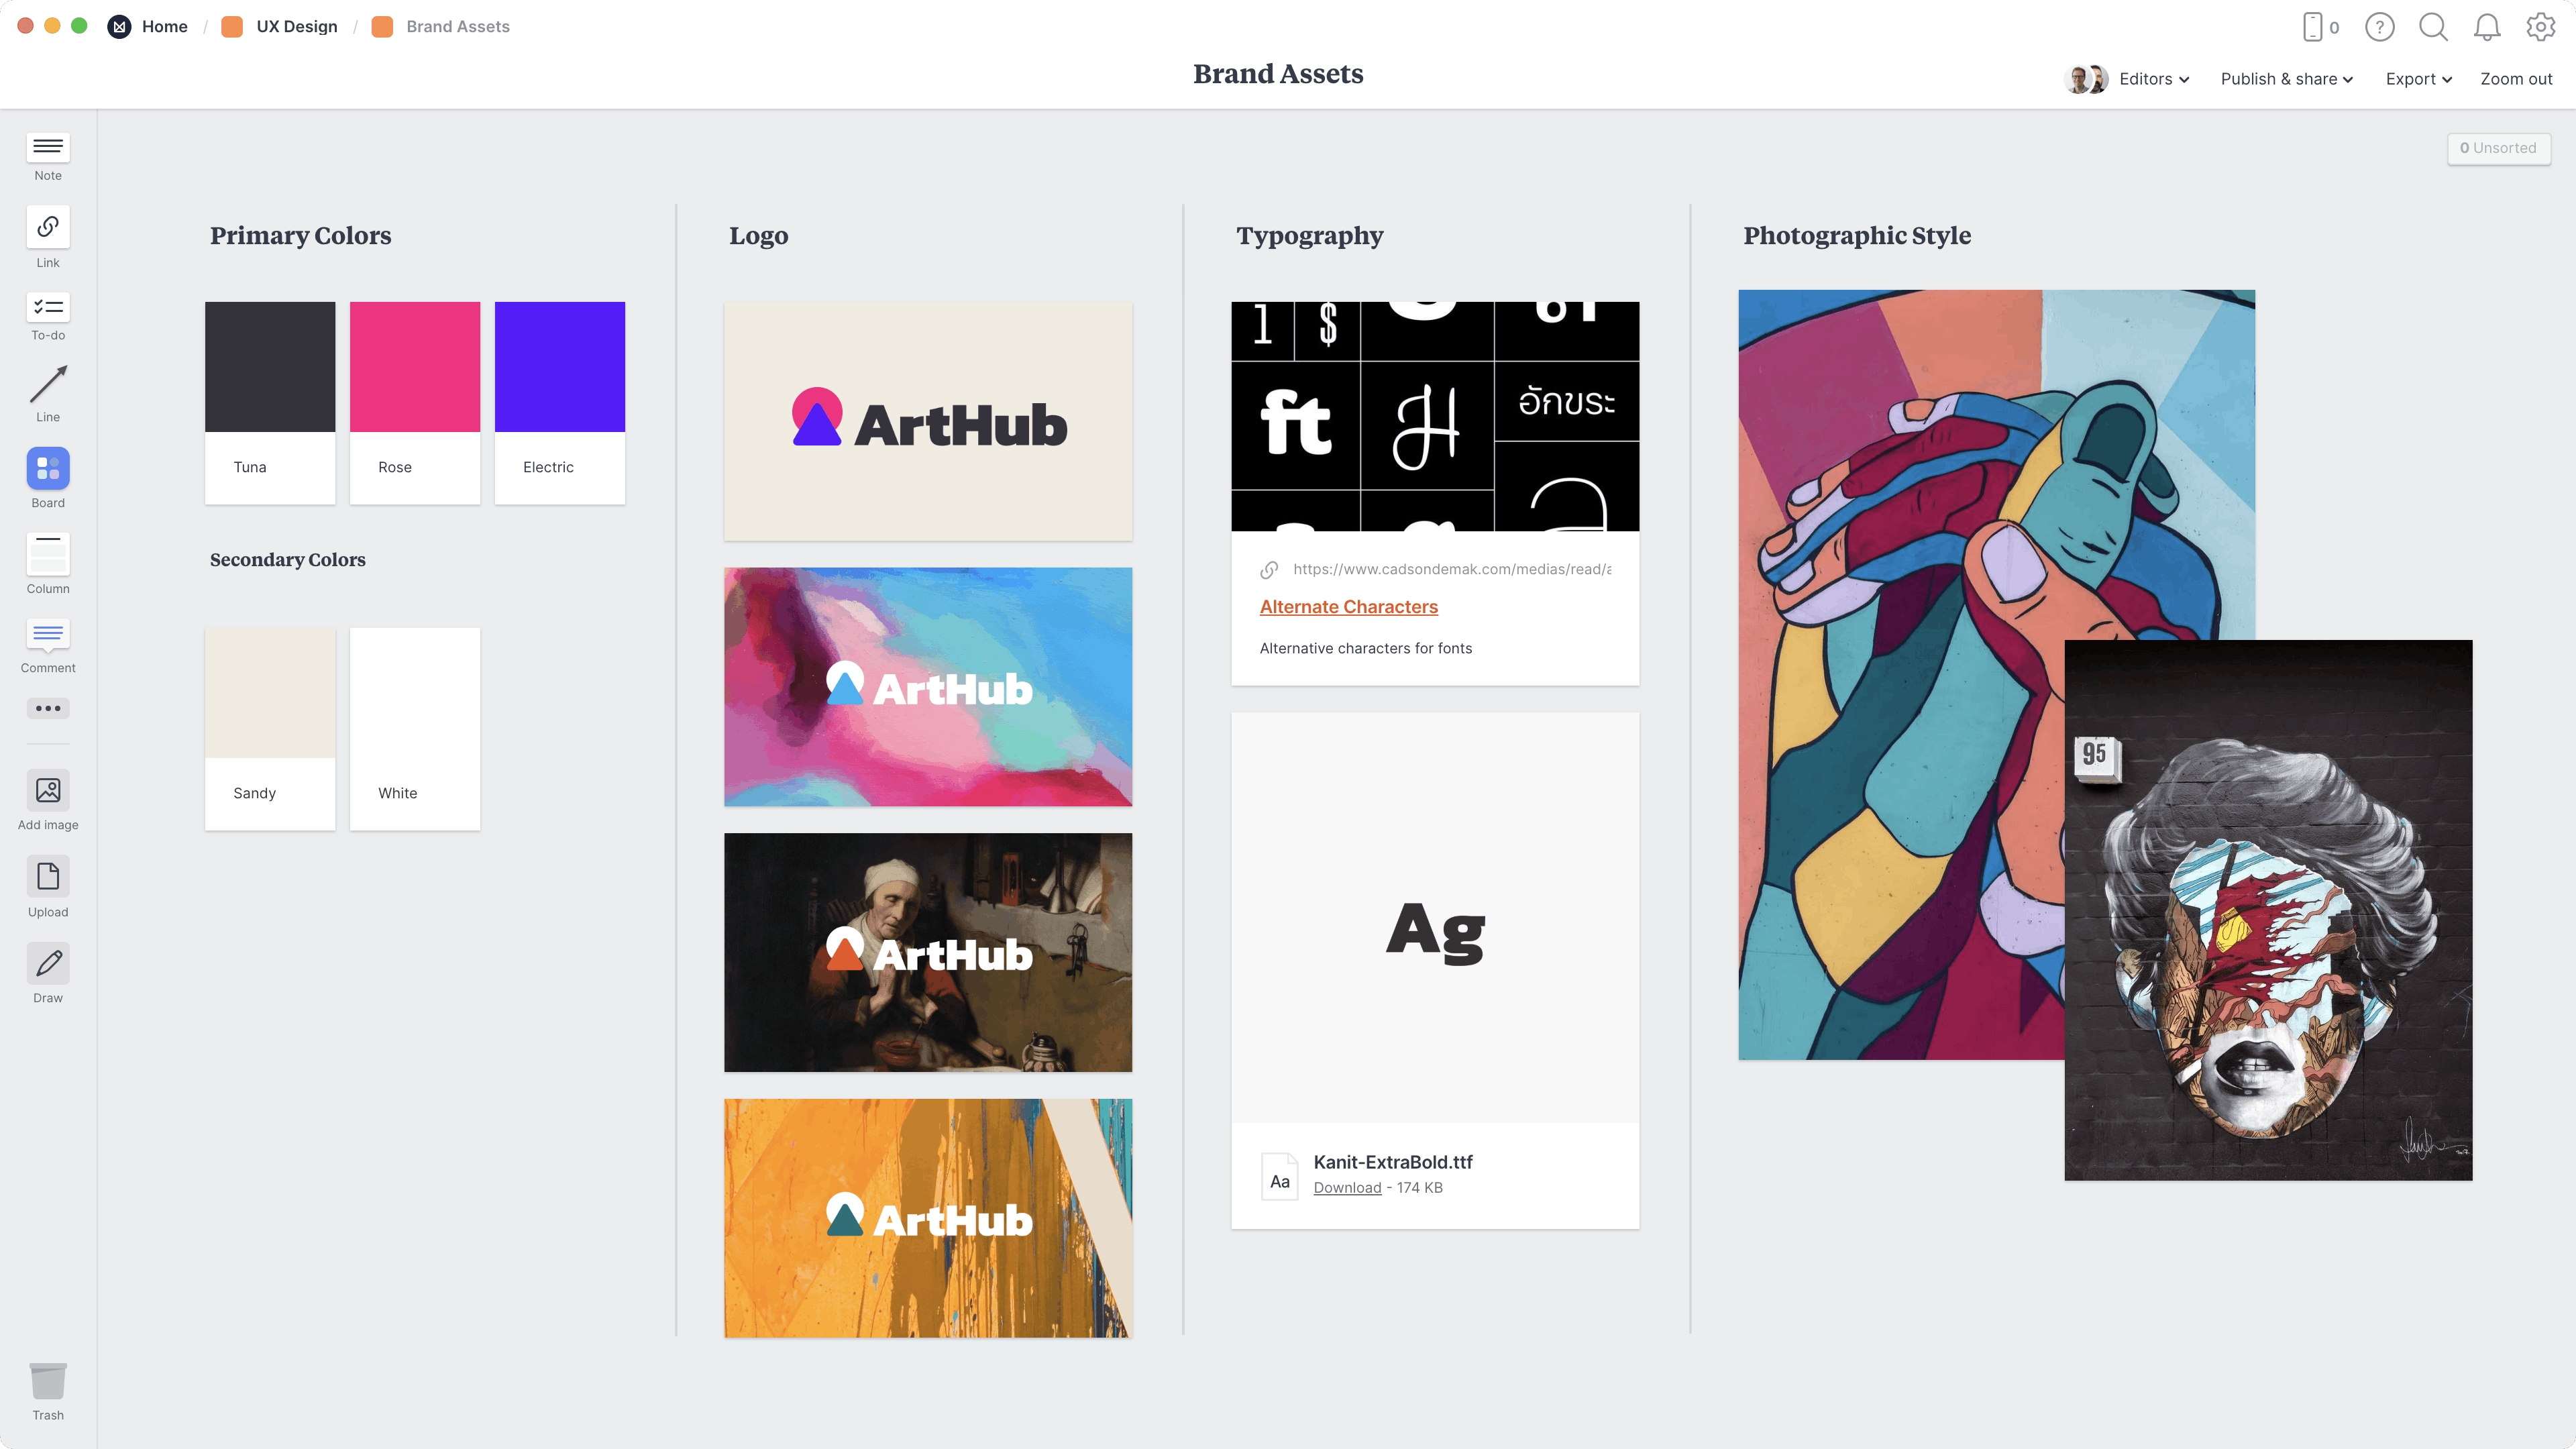 Brand Assets Template, within the Milanote app